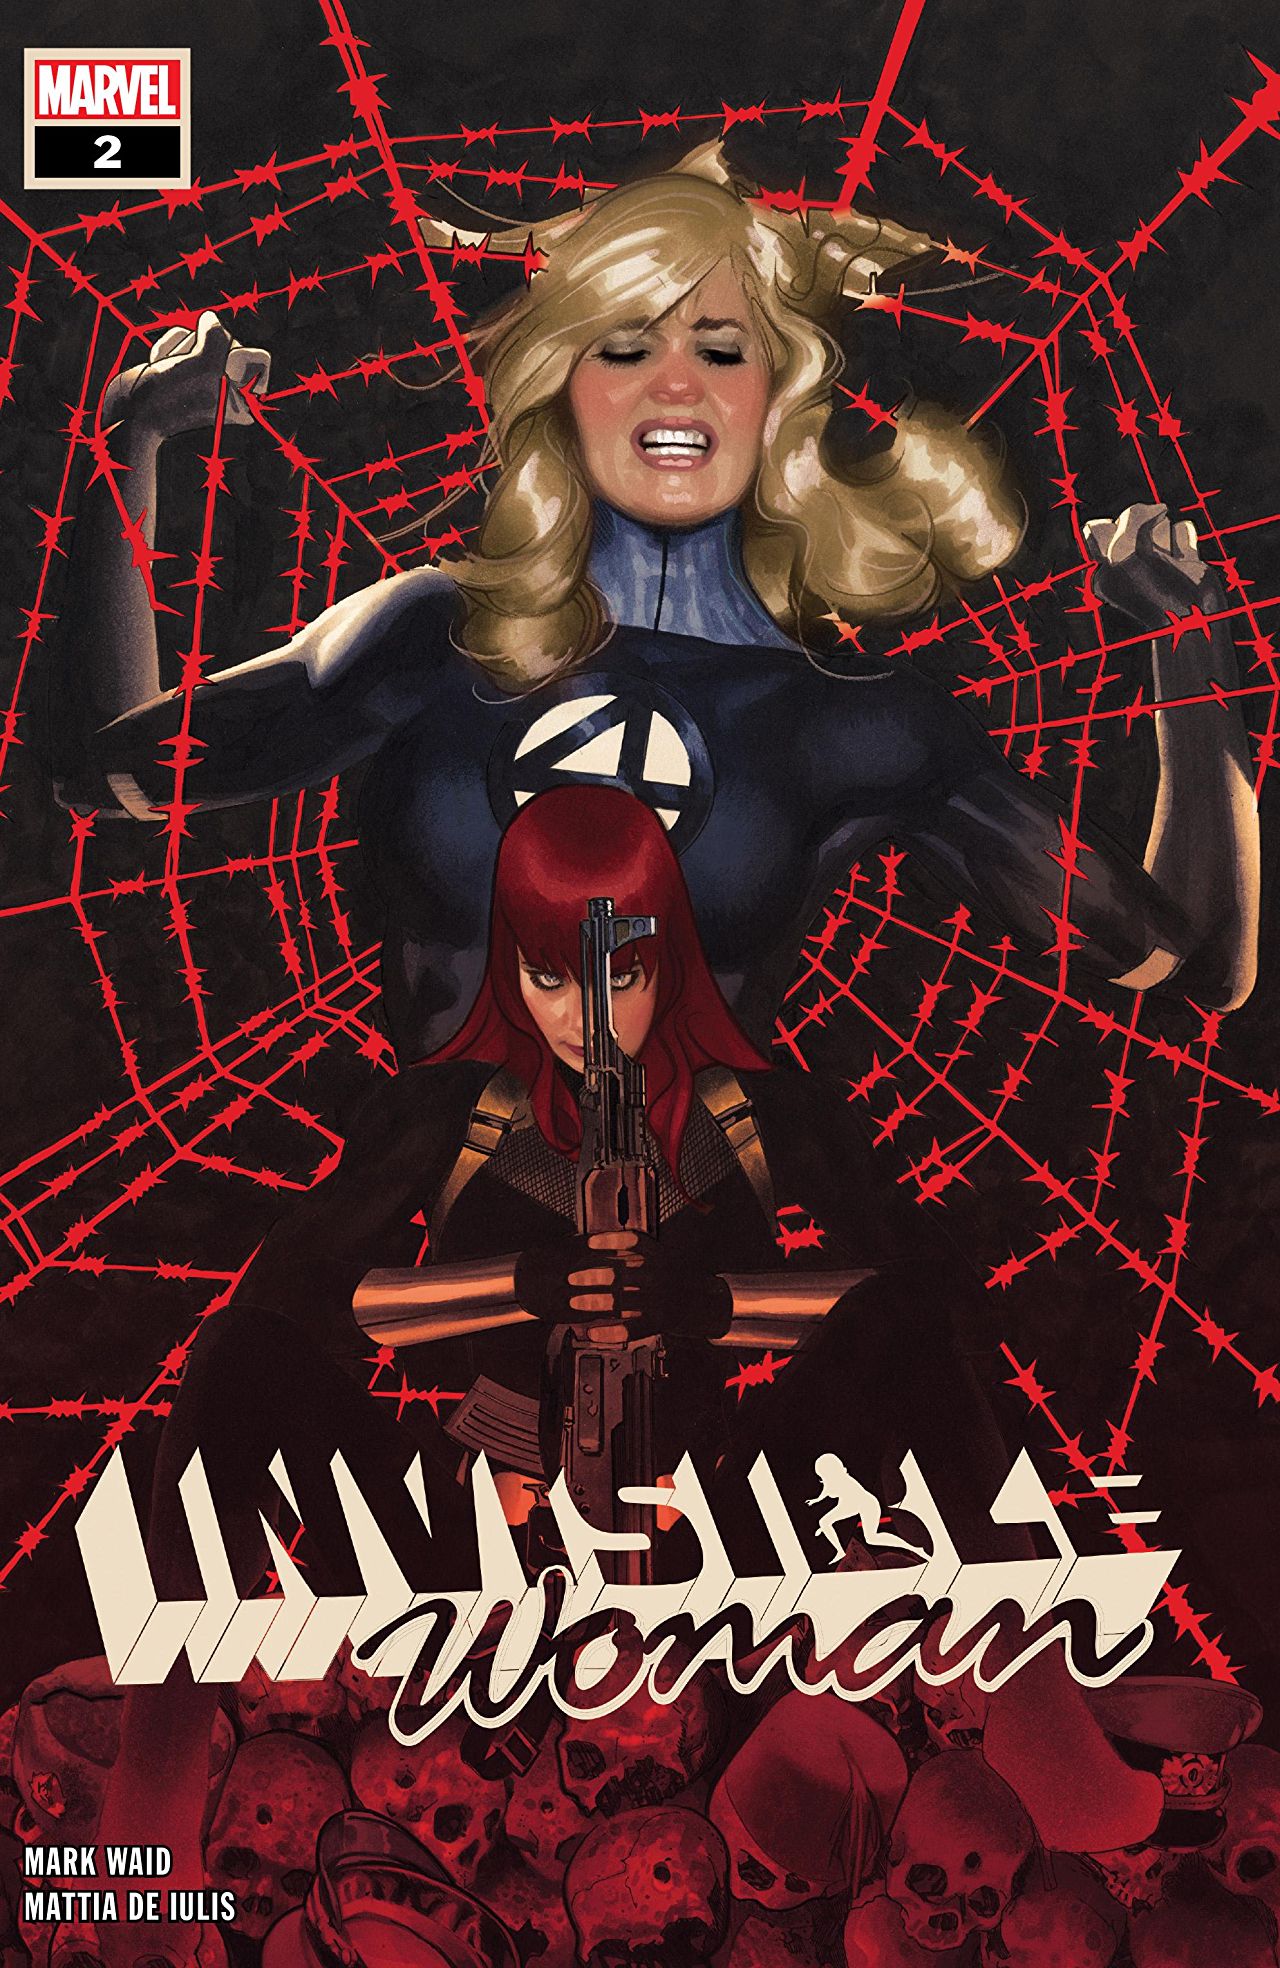 Invisible Woman #2 cover art by Adam Hughes